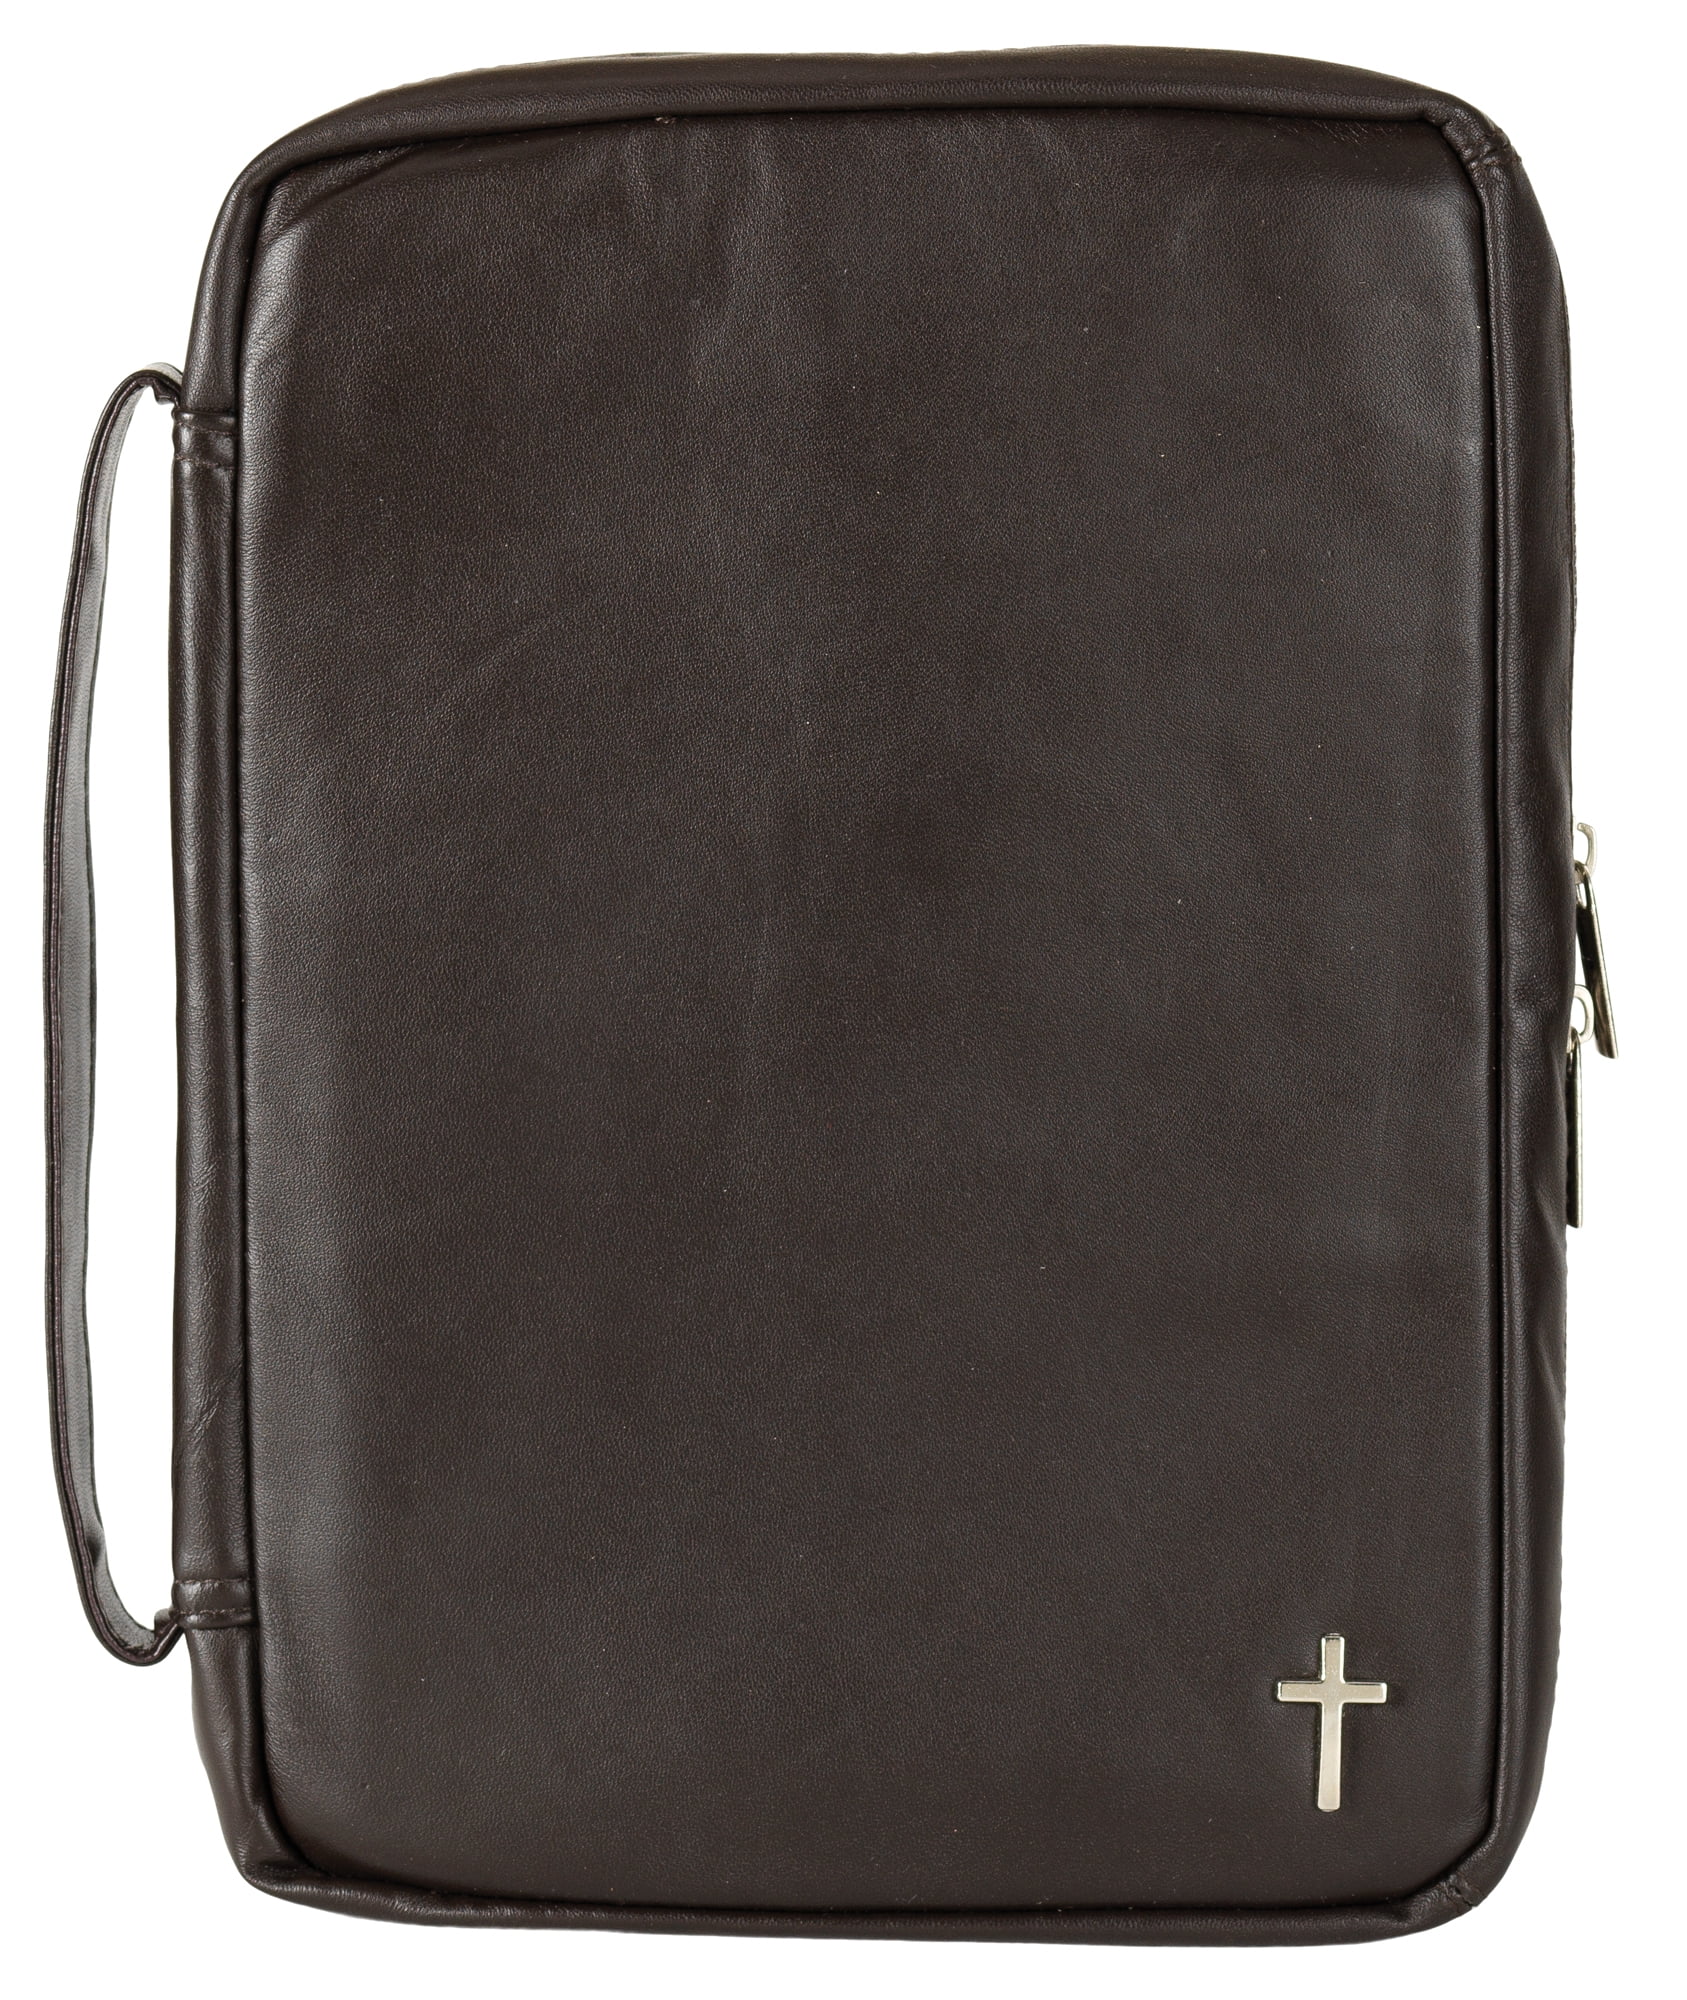 Cross Plain Natural Brown Large Genuine Leather Bible Cover with Handle 